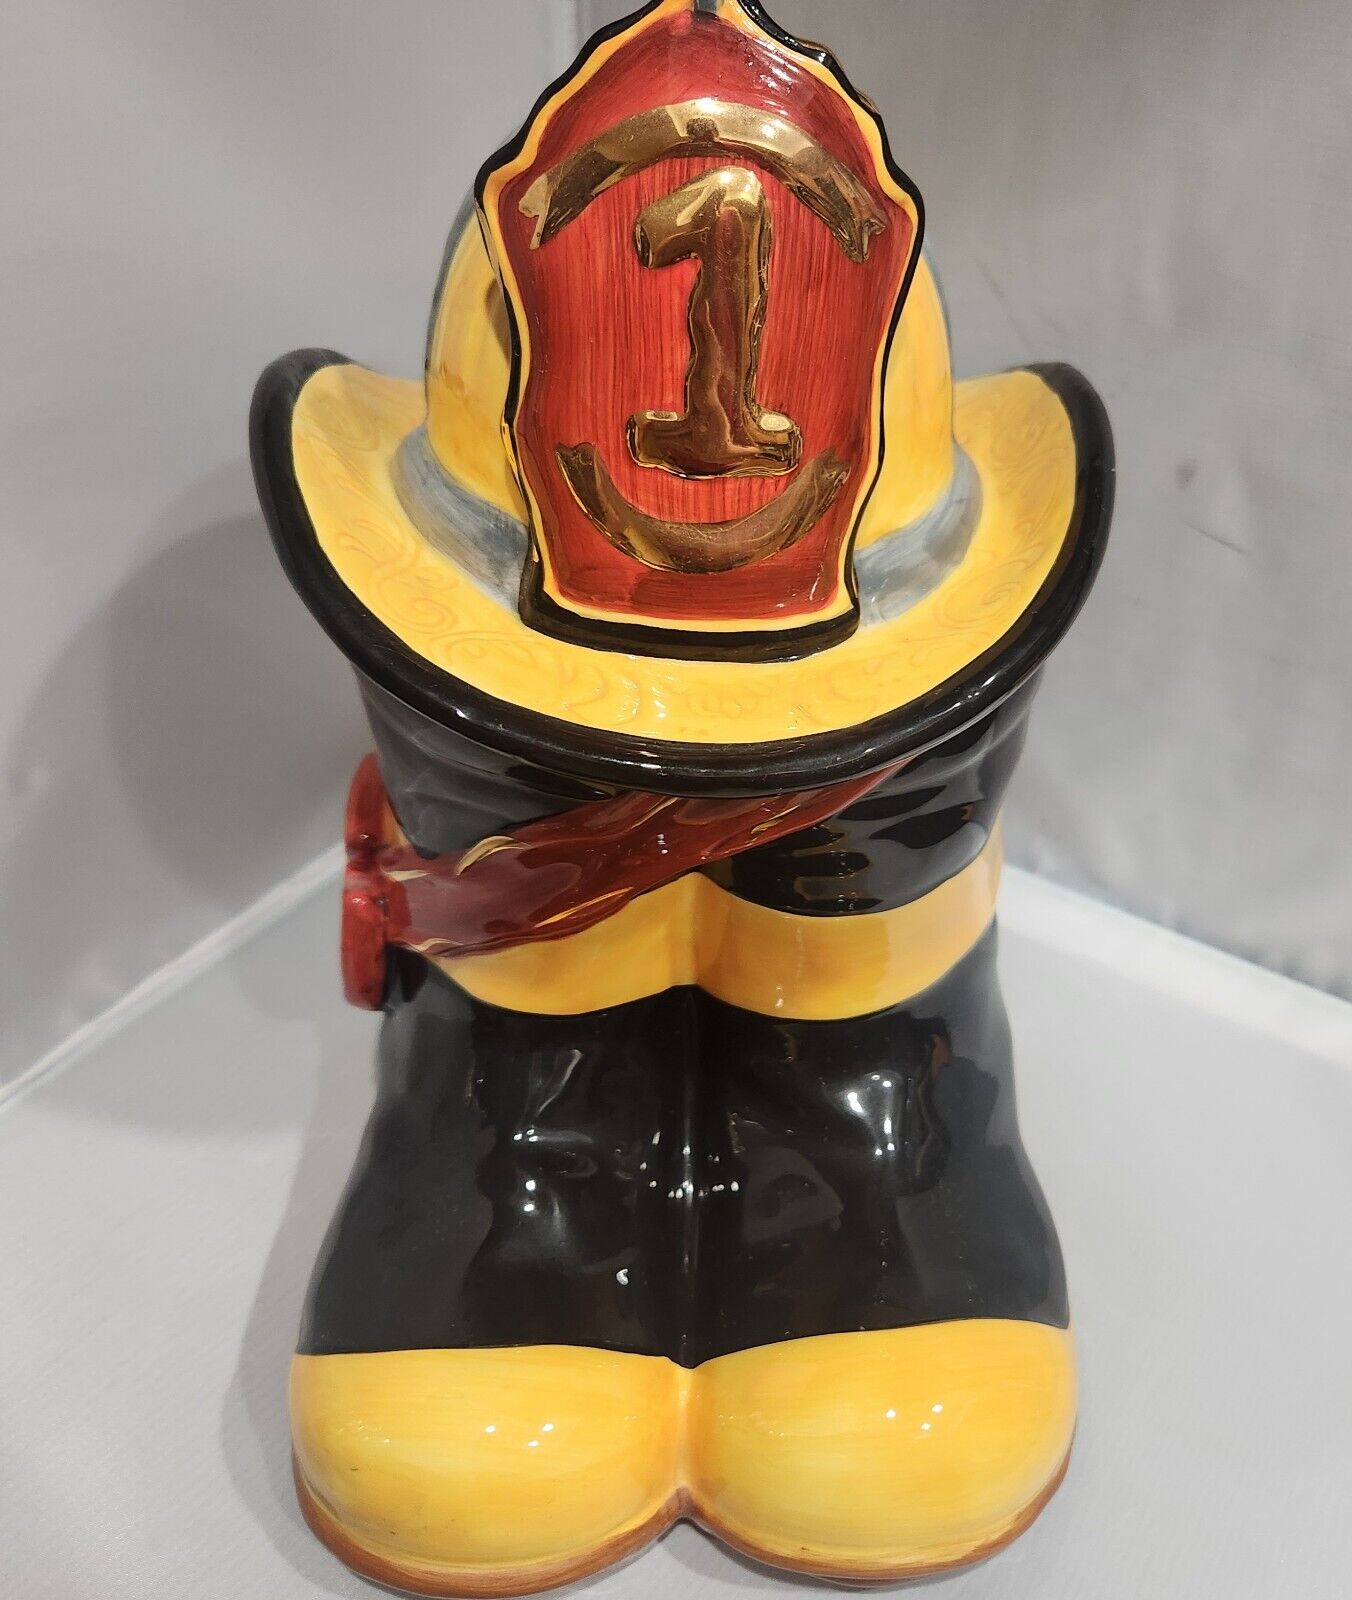 FIRE FIGHTER FIREMAN BOOTS & HAT CERAMIC COOKIE JAR Yellow Black Red 